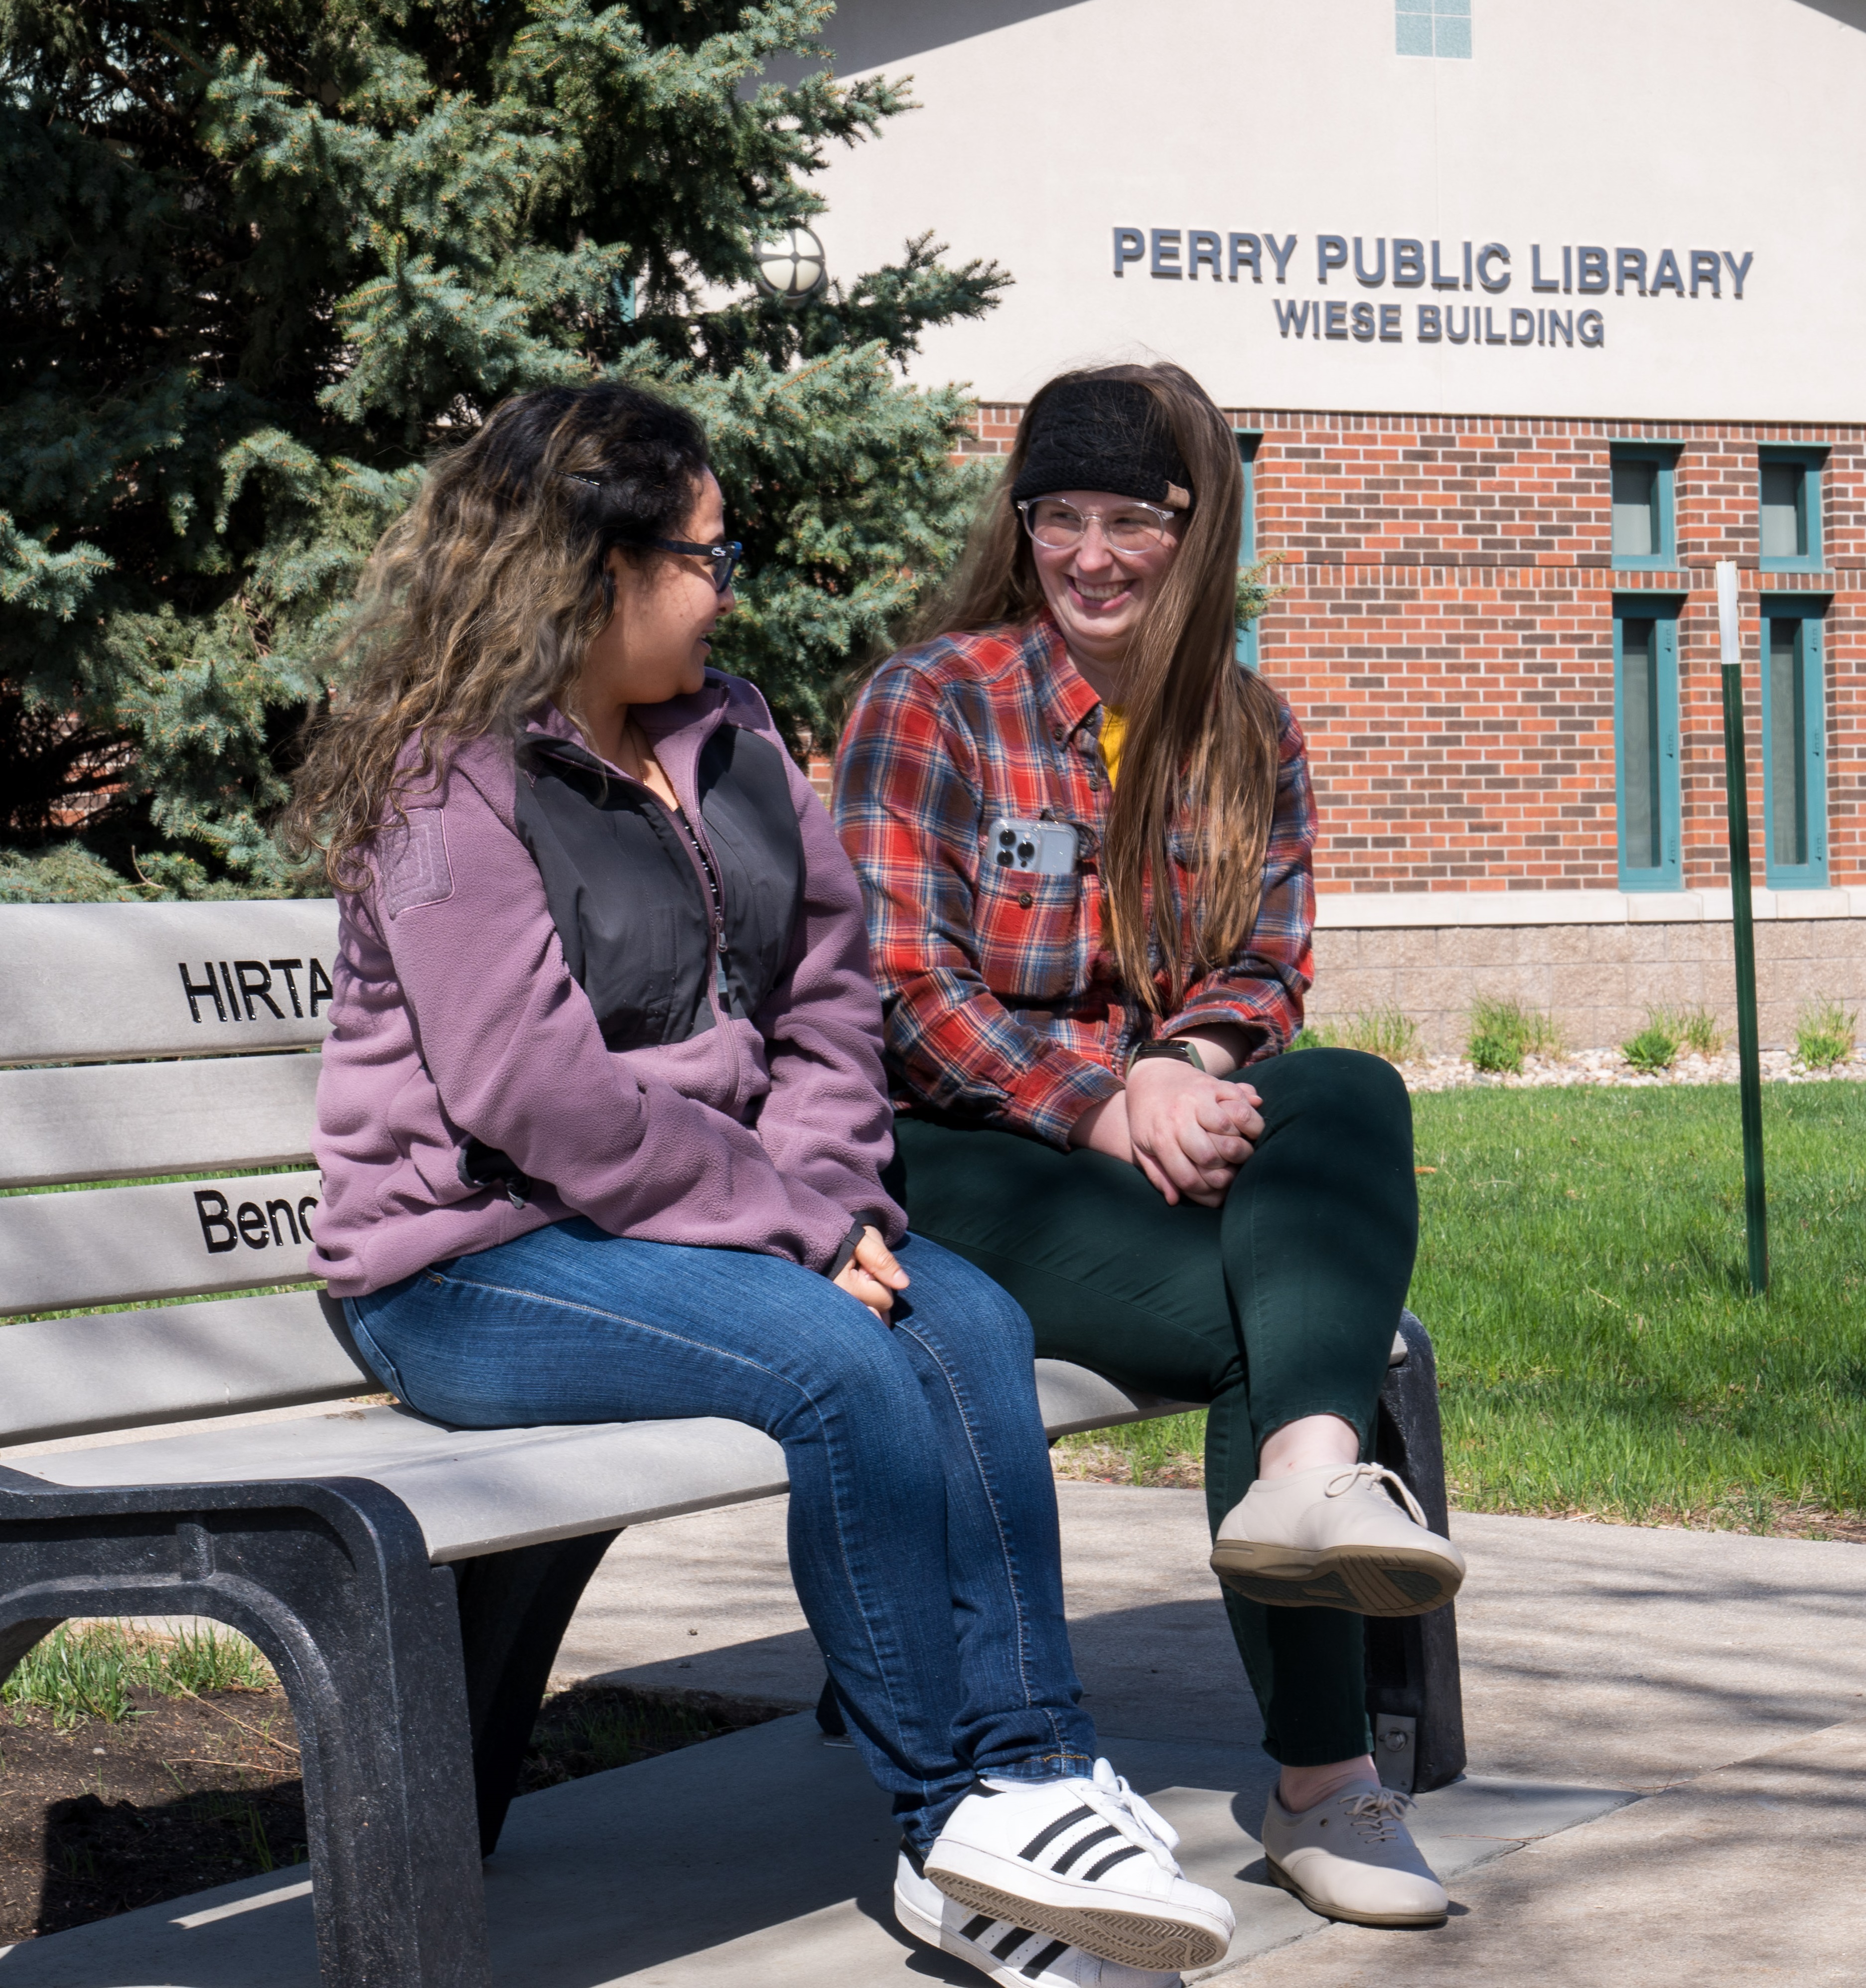 Two women sitting on bus stop bench in front of Perry Public Library